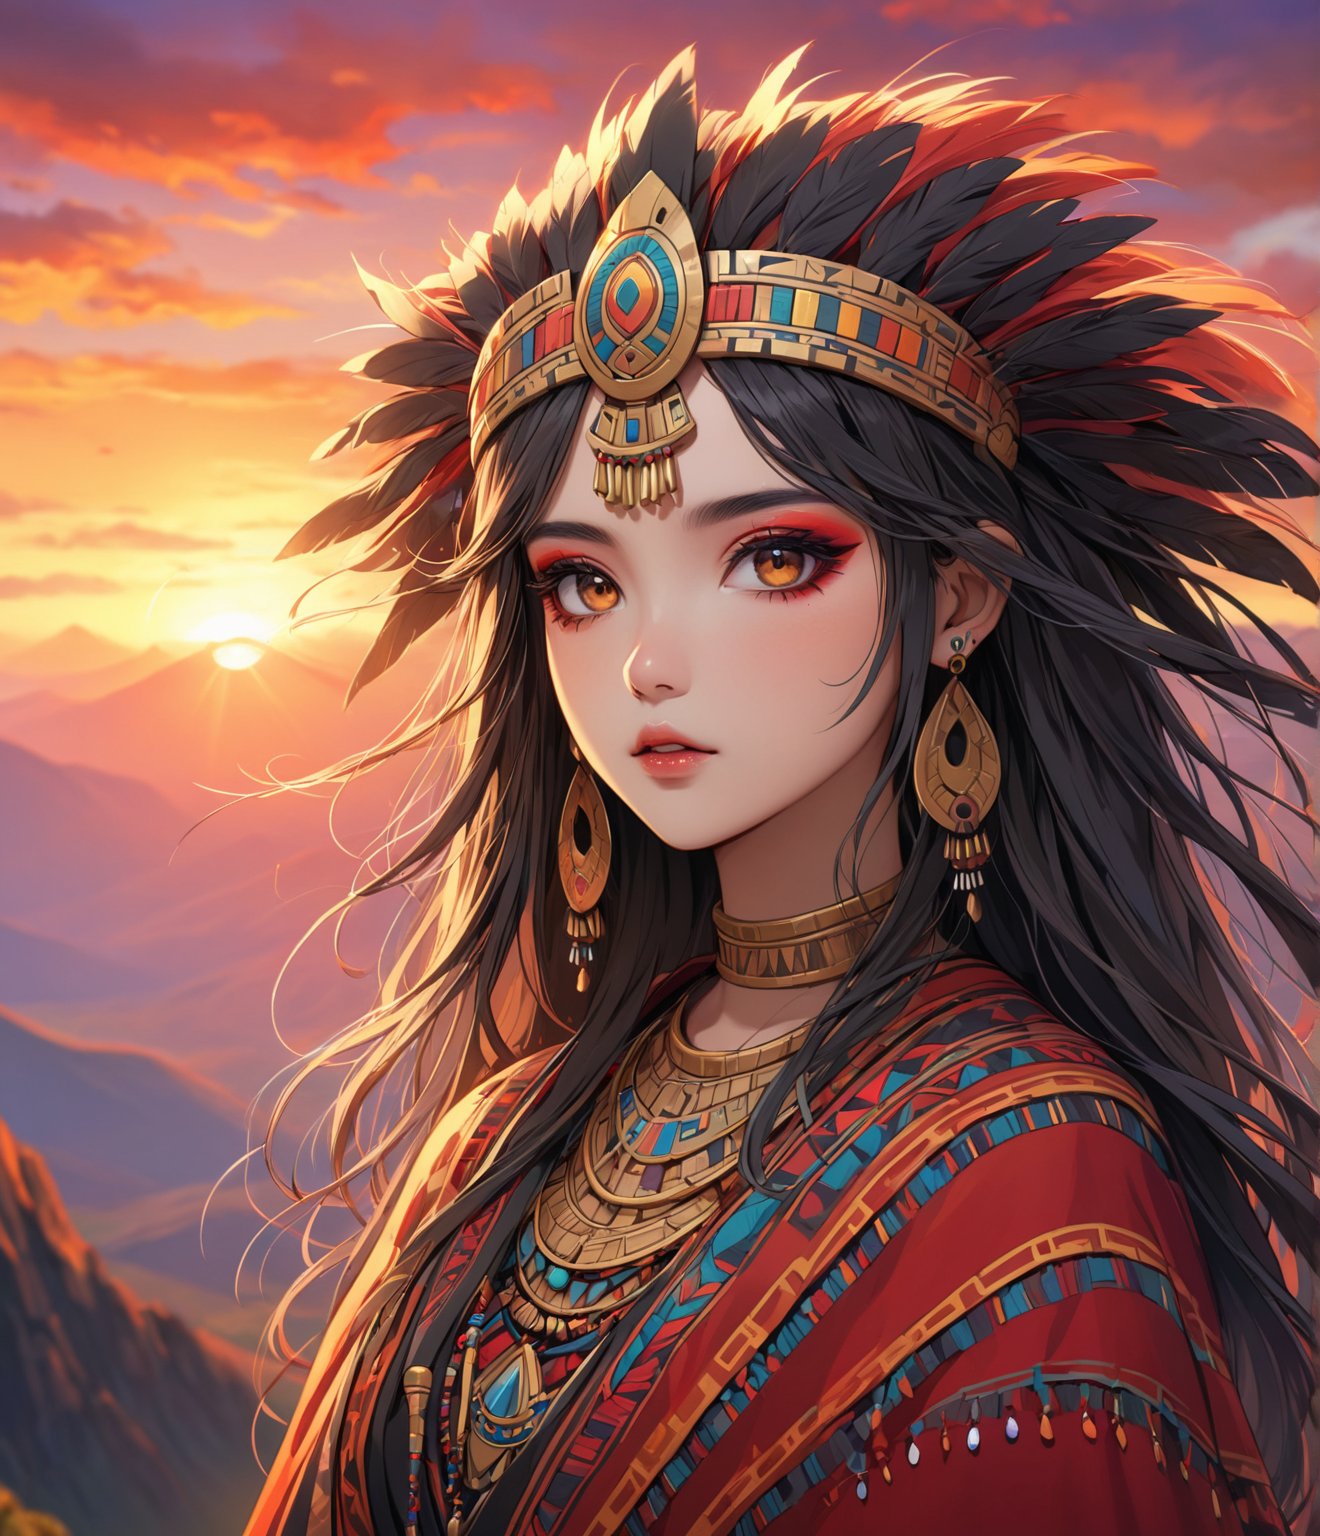 Masterpiece, 4K, ultra detailed, anime style, solo, 1 ancient Inca woman wearing a flowy cape on a mountain top, beautiful flawless face with goth makeup, dangling earrings, colorful headpiece, epic sunset, windy, more detail XL, SFW, depth of field,masterpiece